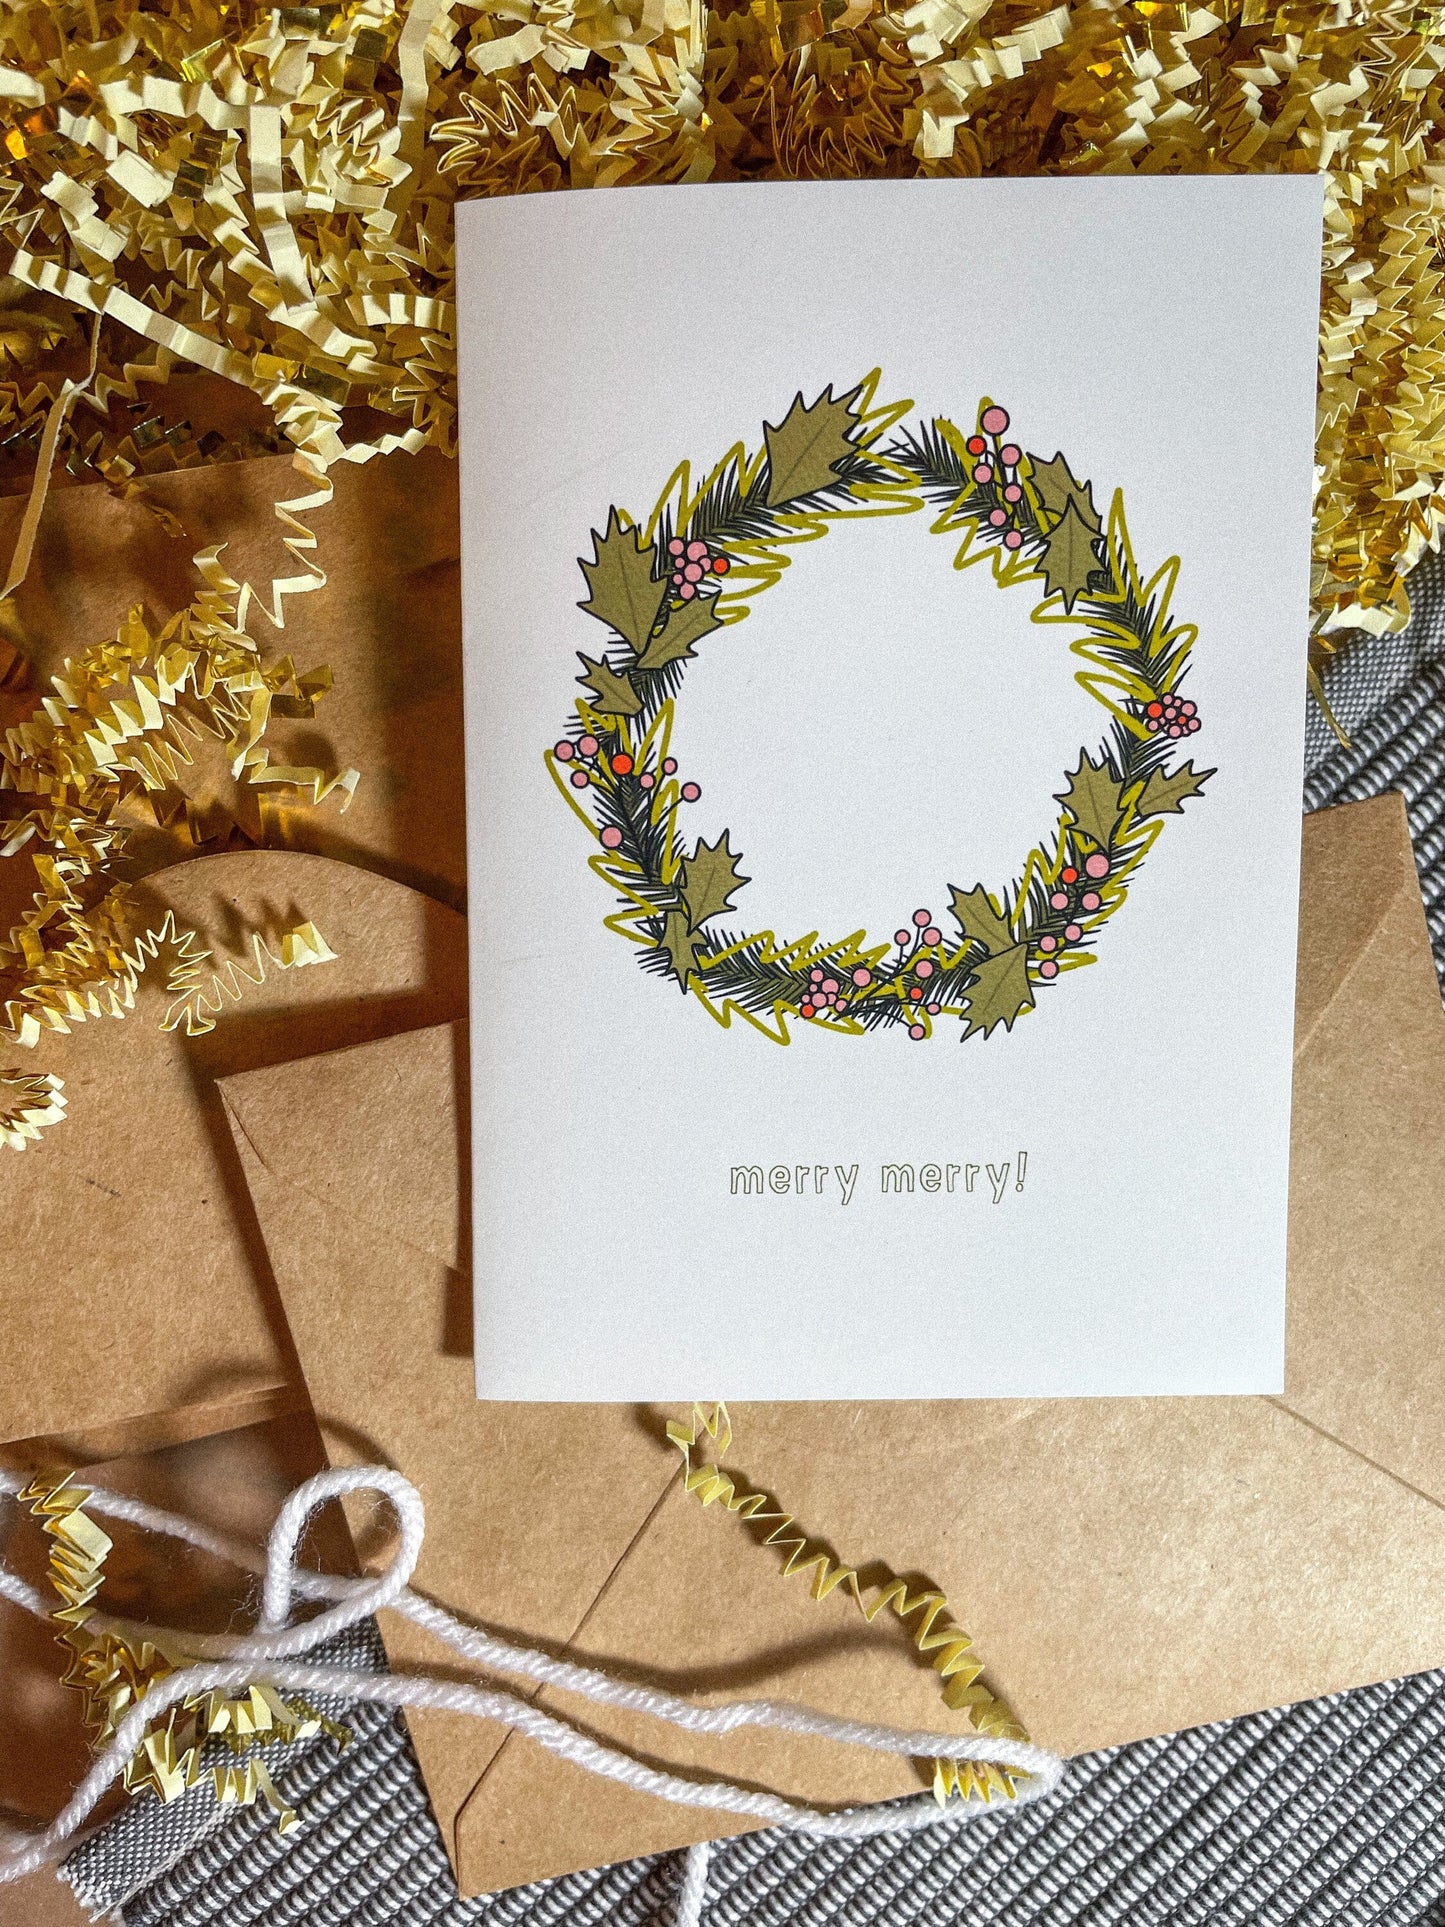 This card features a very merry Christmas wreath with the text 'merry merry!" It's the perfect Christmas card for anyone in your life! 